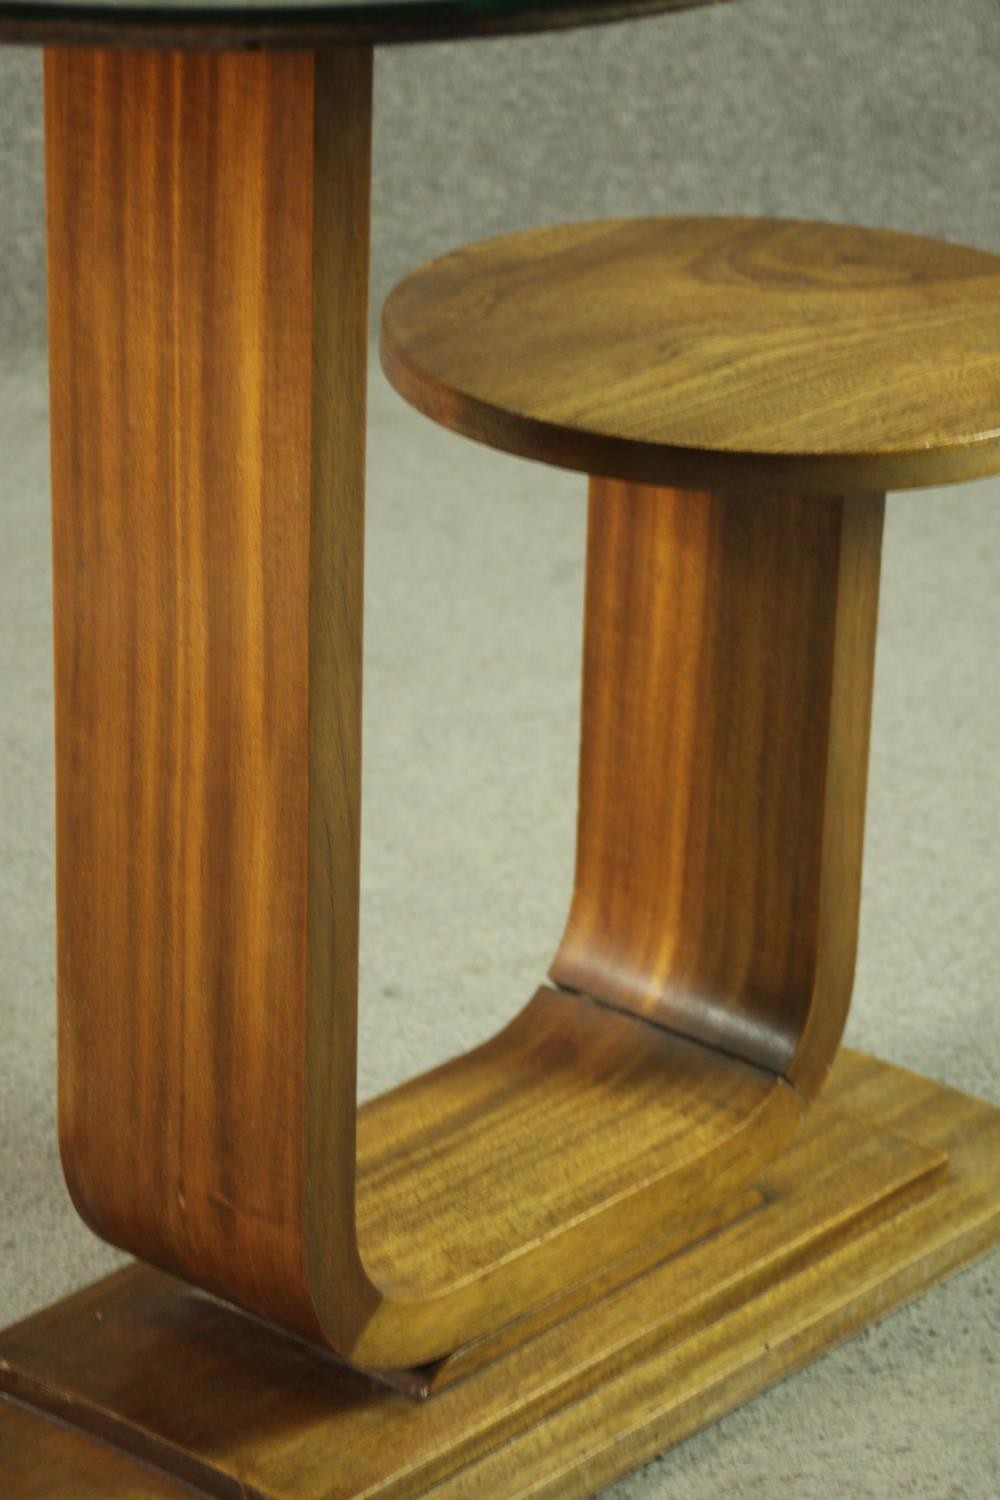 An Art Deco teak table and stool, with a circular glass table top, on a support which curves up to a - Image 6 of 8